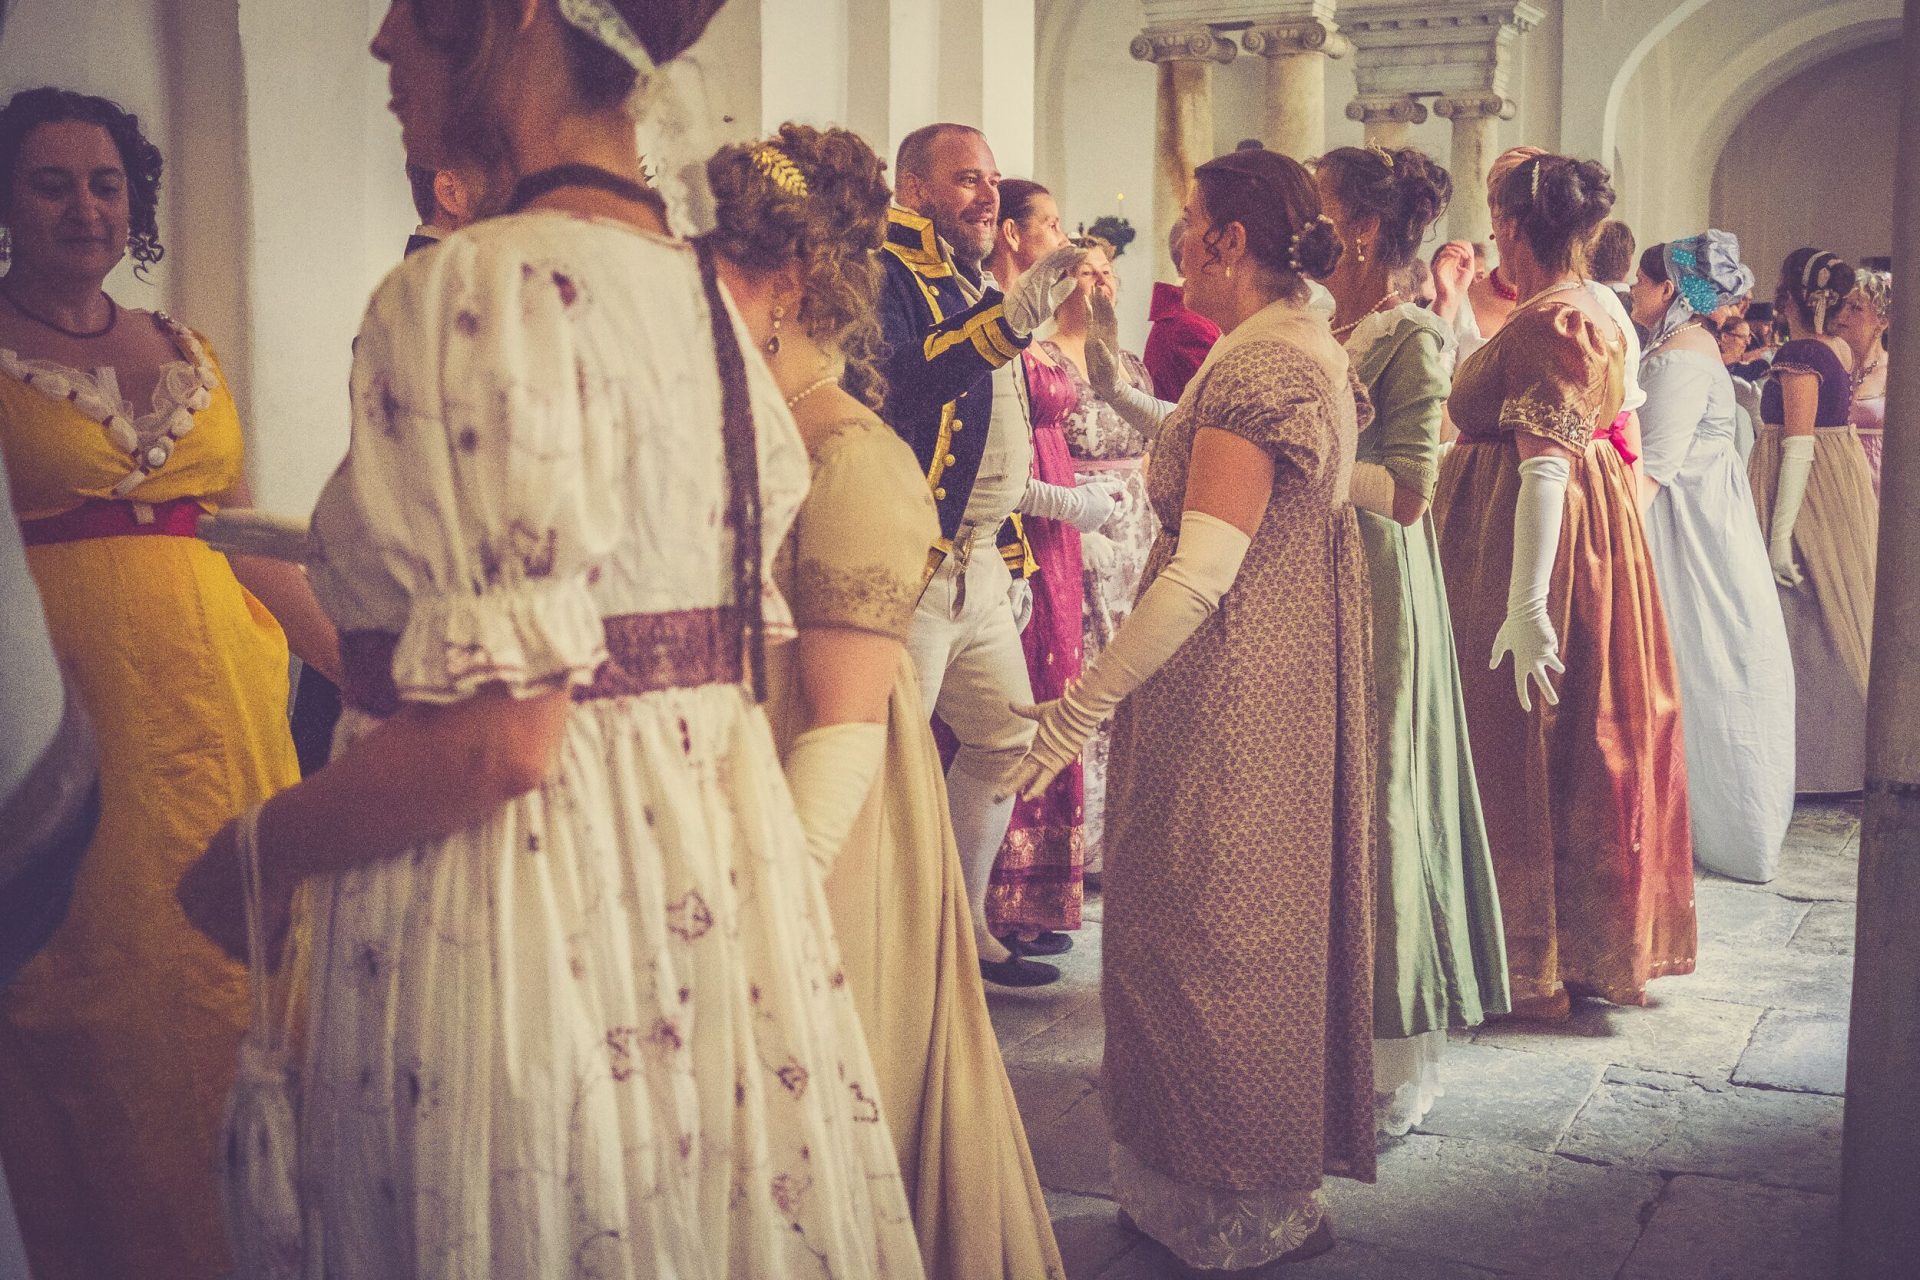 Ball guests dance wearing historical clothing.